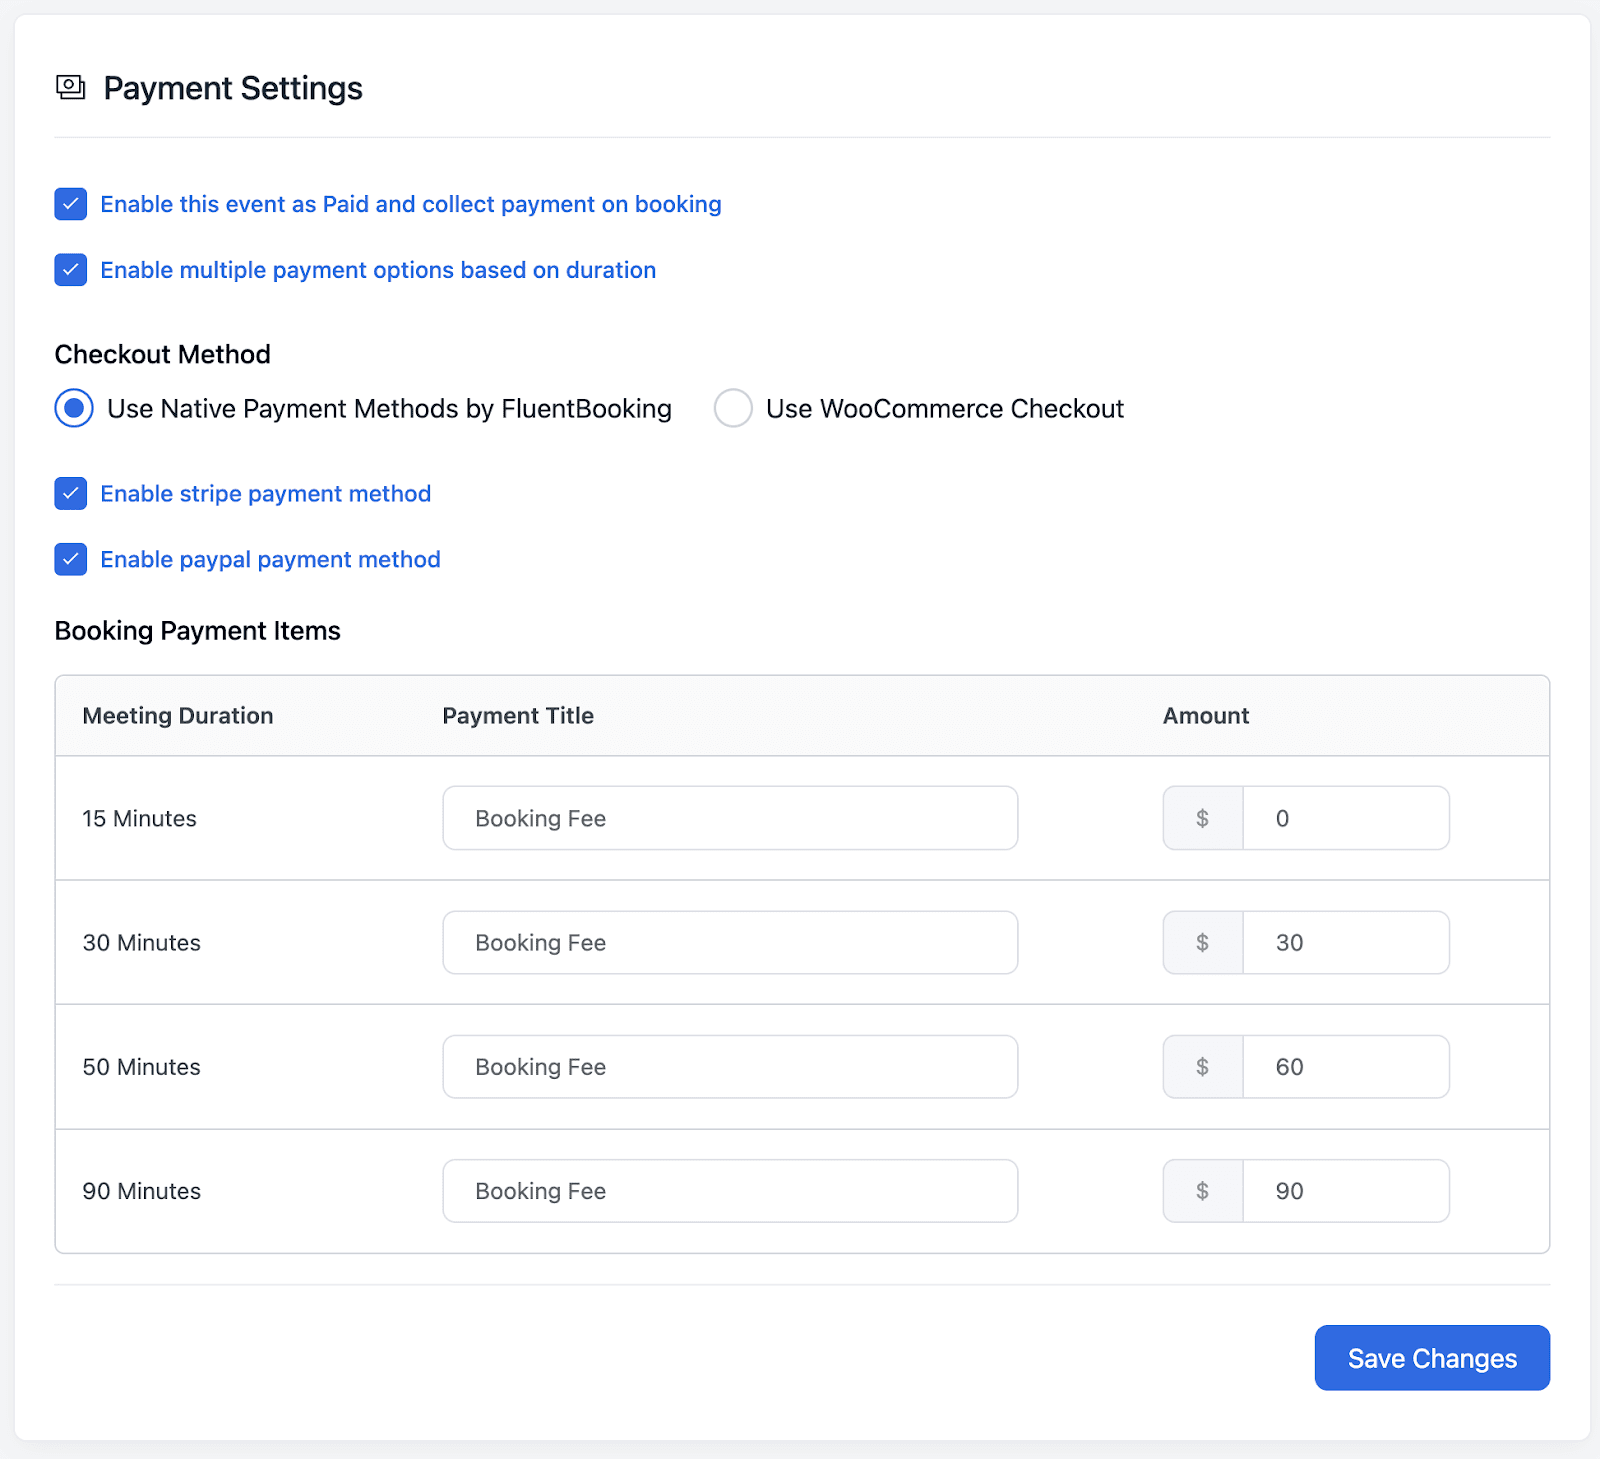 multi-payment option based on meeting duration